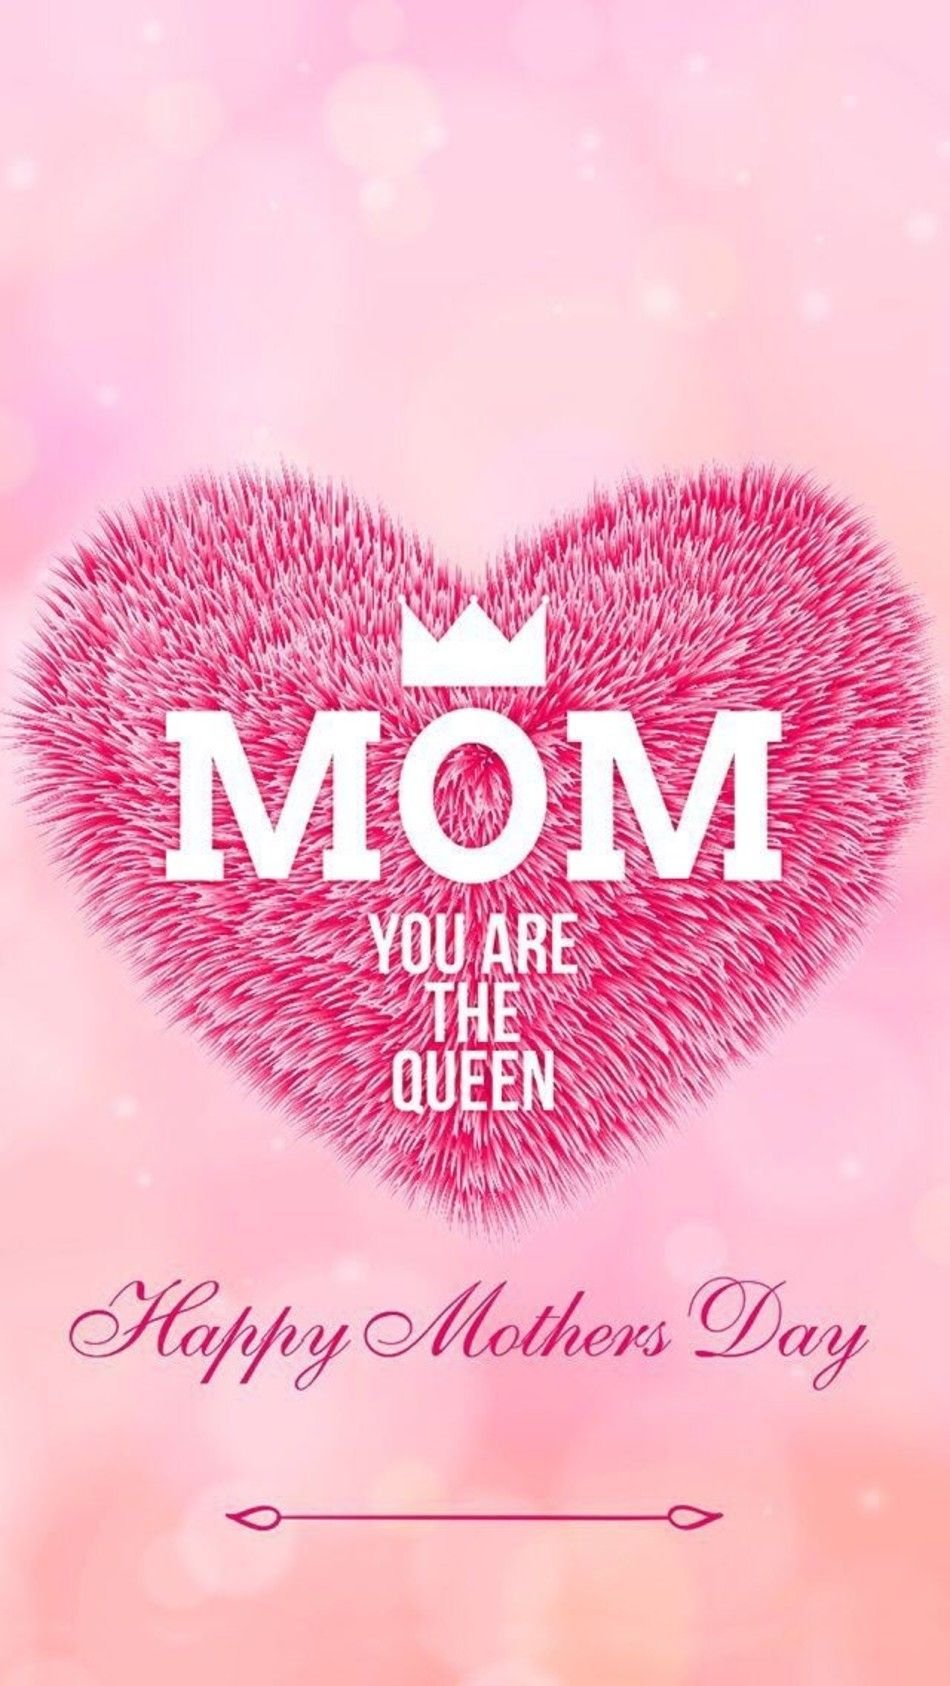 Vector Illustration Happy Mothers Day Wallpaper Stock Vector Royalty Free  76122919  Shutterstock